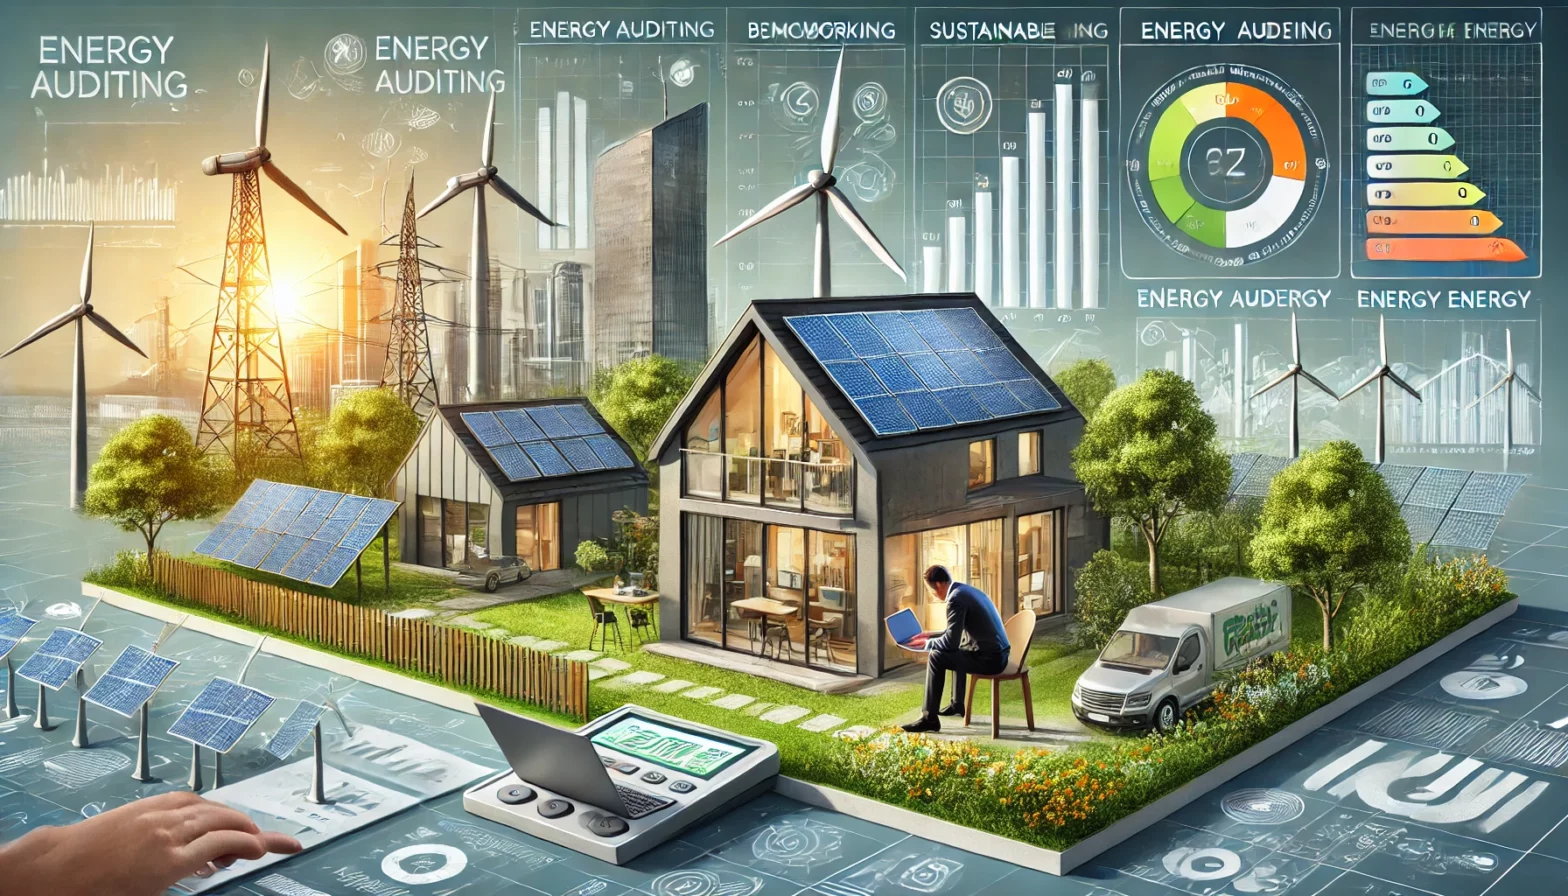 An illustration depicting the importance of benchmarking in energy auditing for sustainable energy, featuring a modern building with solar panels, wind turbines, a smart energy meter, and charts showing energy usage and efficiency. A professional auditor is analyzing data on a laptop in a green, eco-friendly environment.